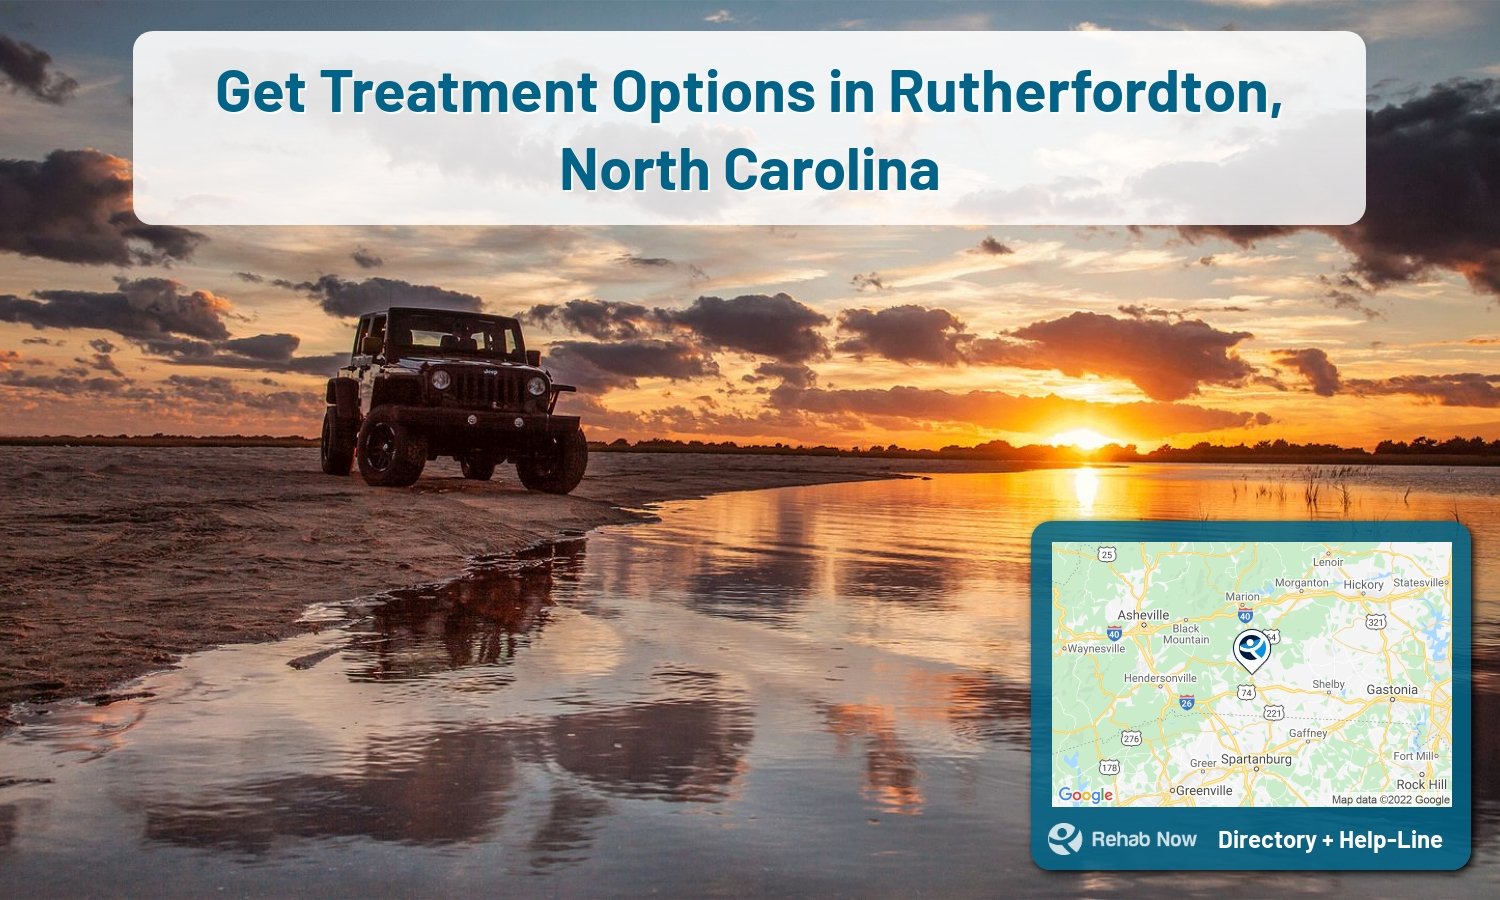 Rutherfordton, NC Treatment Centers. Find drug rehab in Rutherfordton, North Carolina, or detox and treatment programs. Get the right help now!